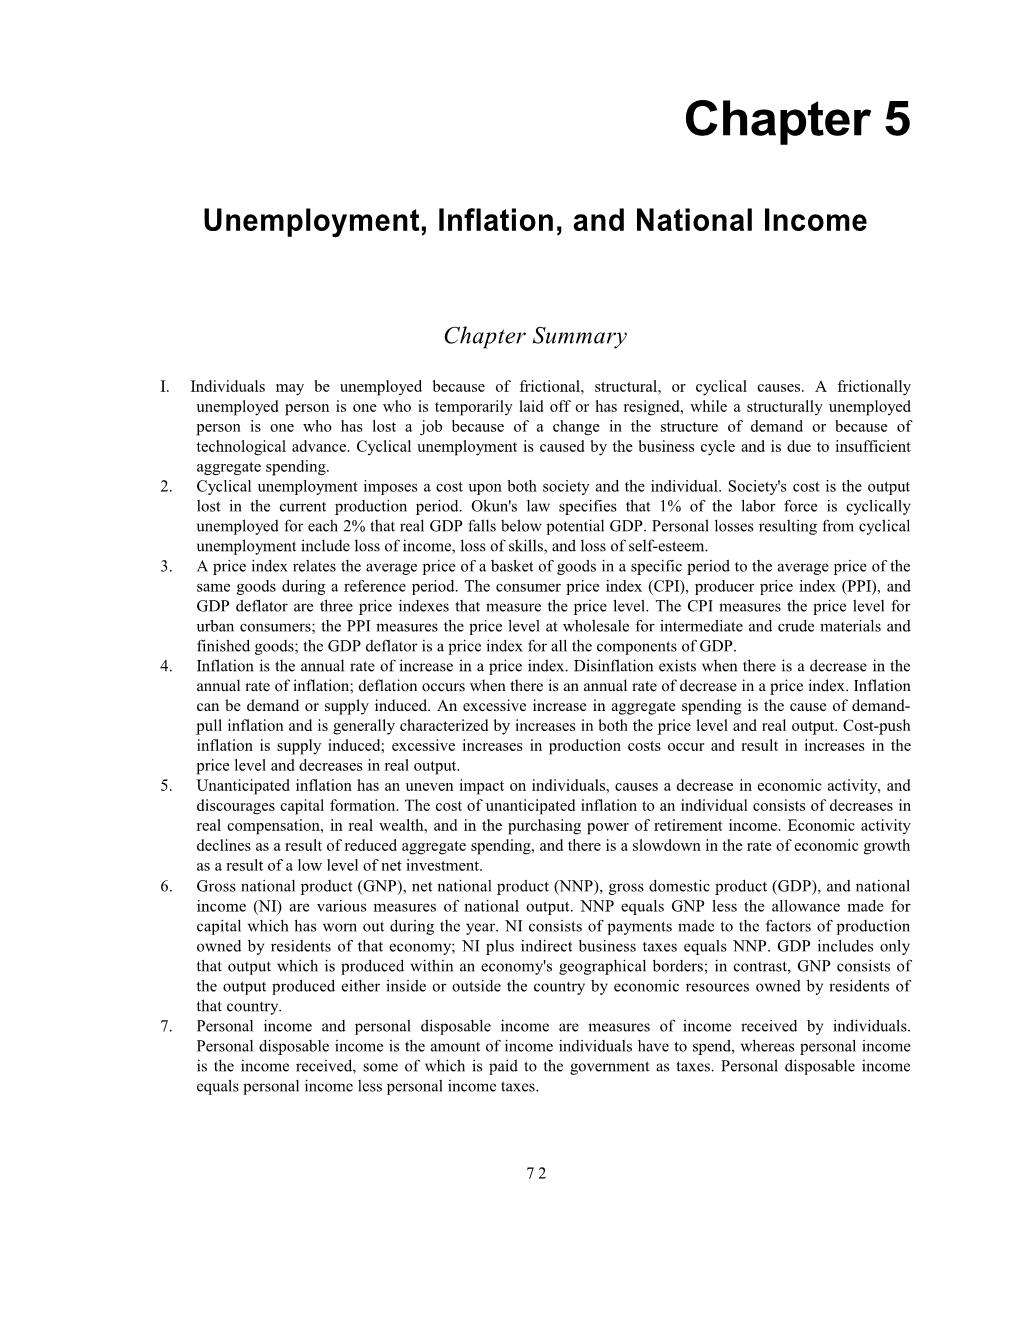 Unemployment, Inflation, and National Income